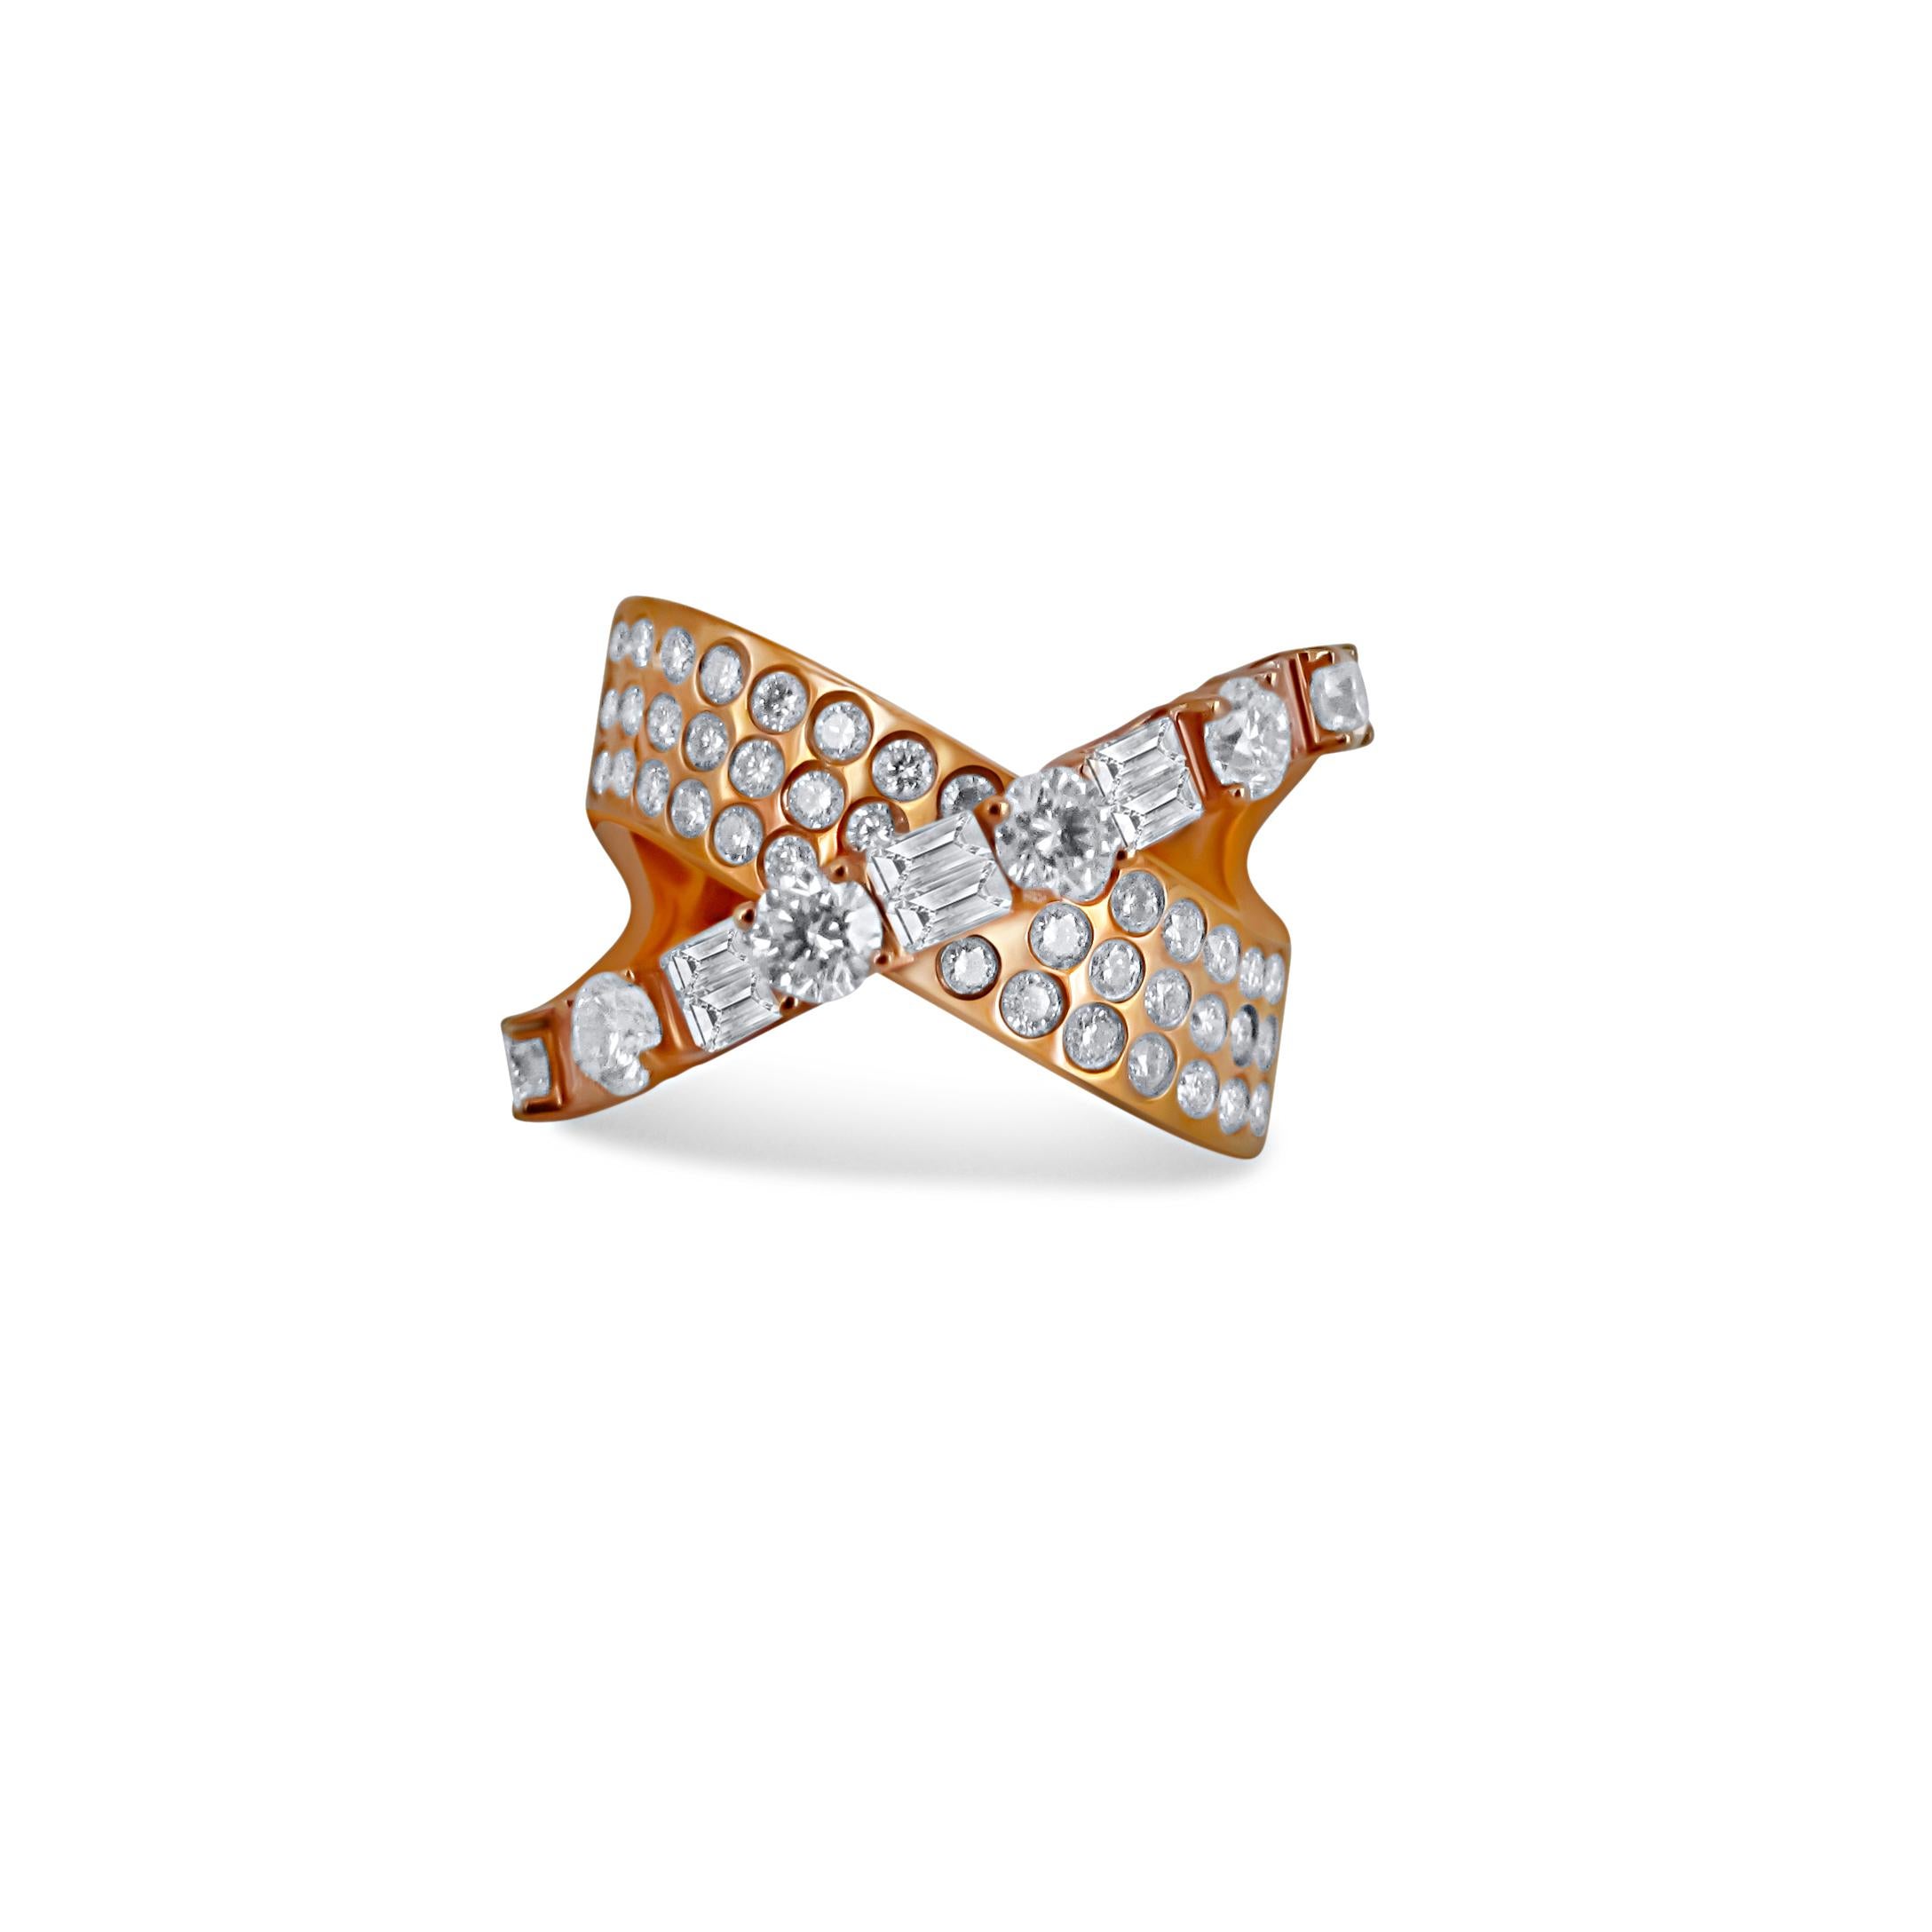 Total Ring Carat Weight: 1.57cts
Diamond Clarity: VS1
Diamond Color: G
Gold Purity: 18k
Gold Color: Rose
Gold Weight: 7.47g
Diamond Type: Natural Diamond, Conflict-Free

This piece has been designed and curated with a creative and artistic soul in